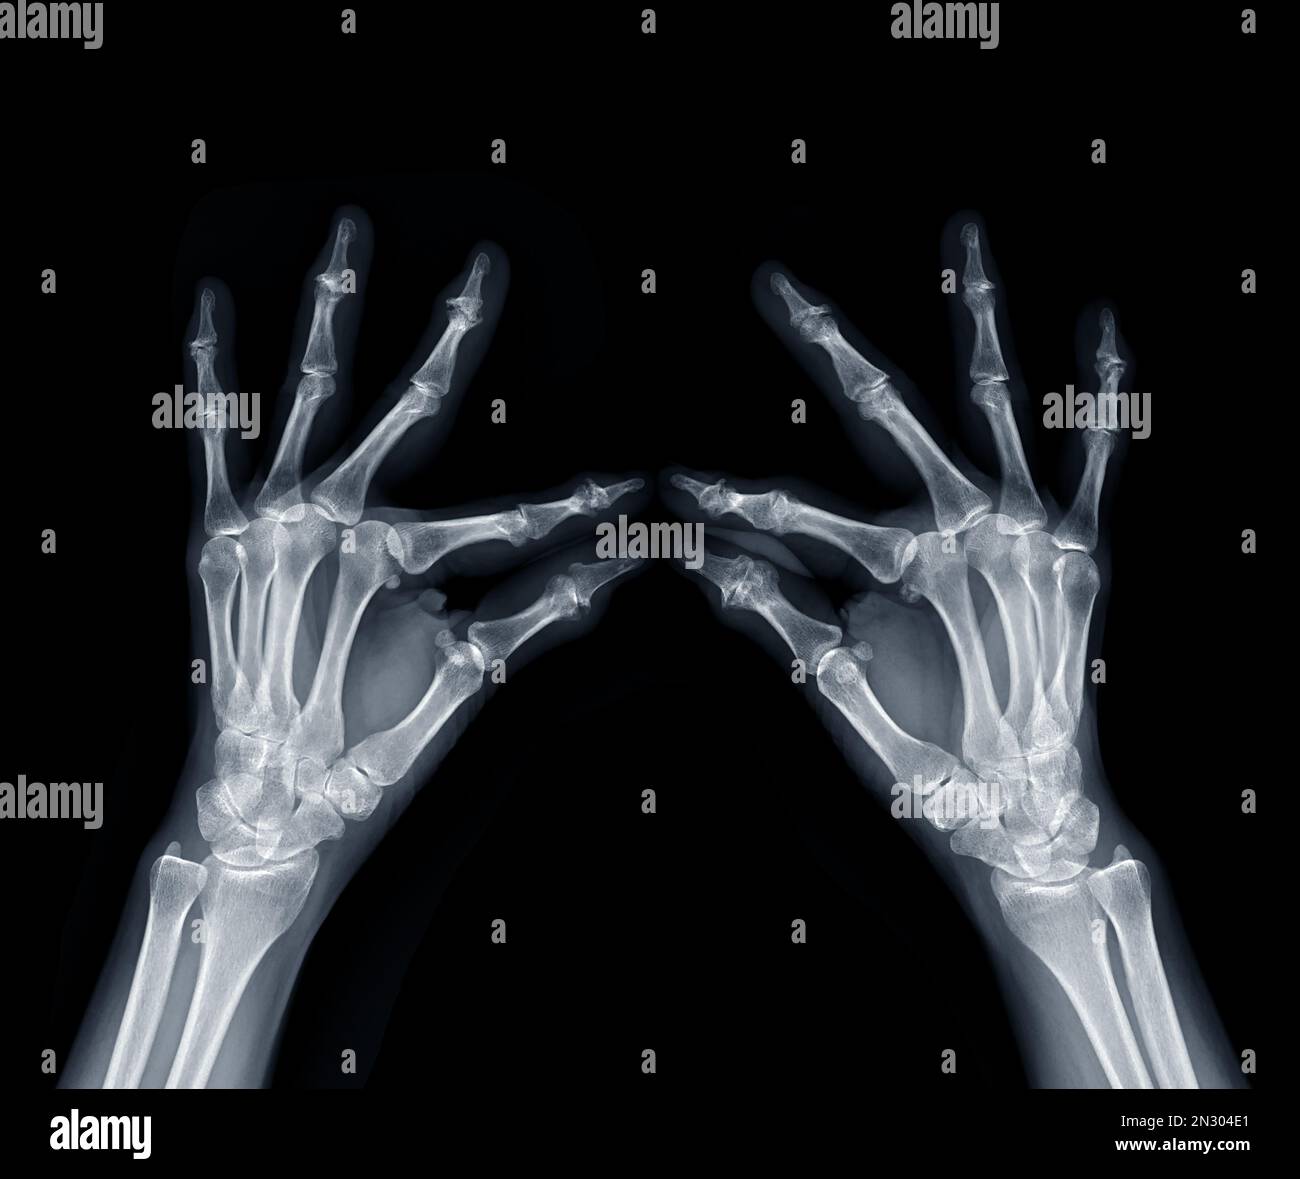 Film x-ray both hand oblique view show  human's hands isolated  on black background . Stock Photo